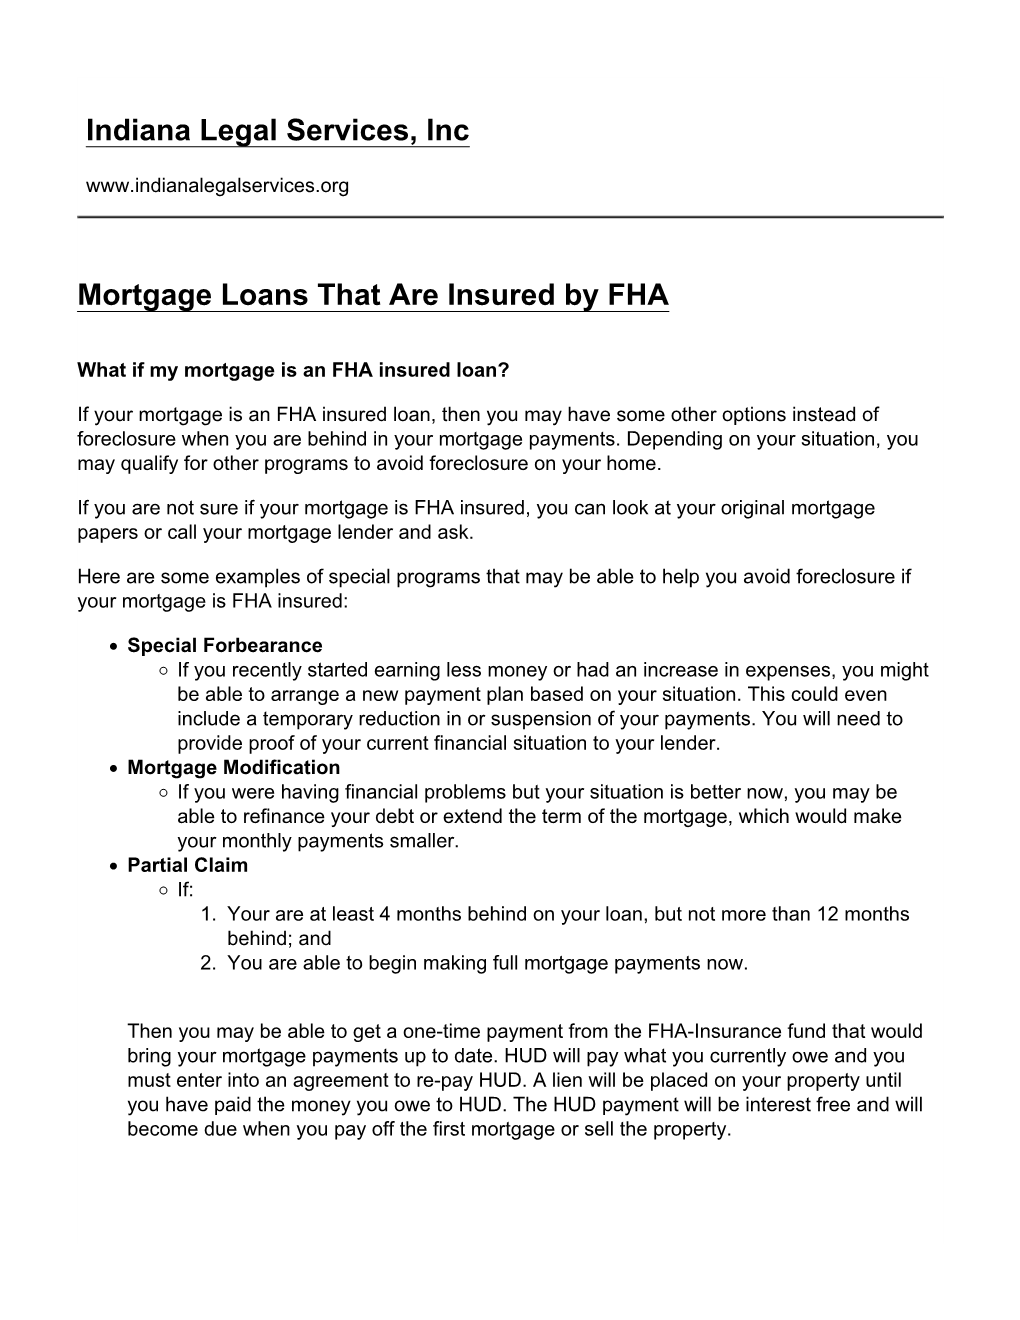 Mortgage Loans That Are Insured by FHA